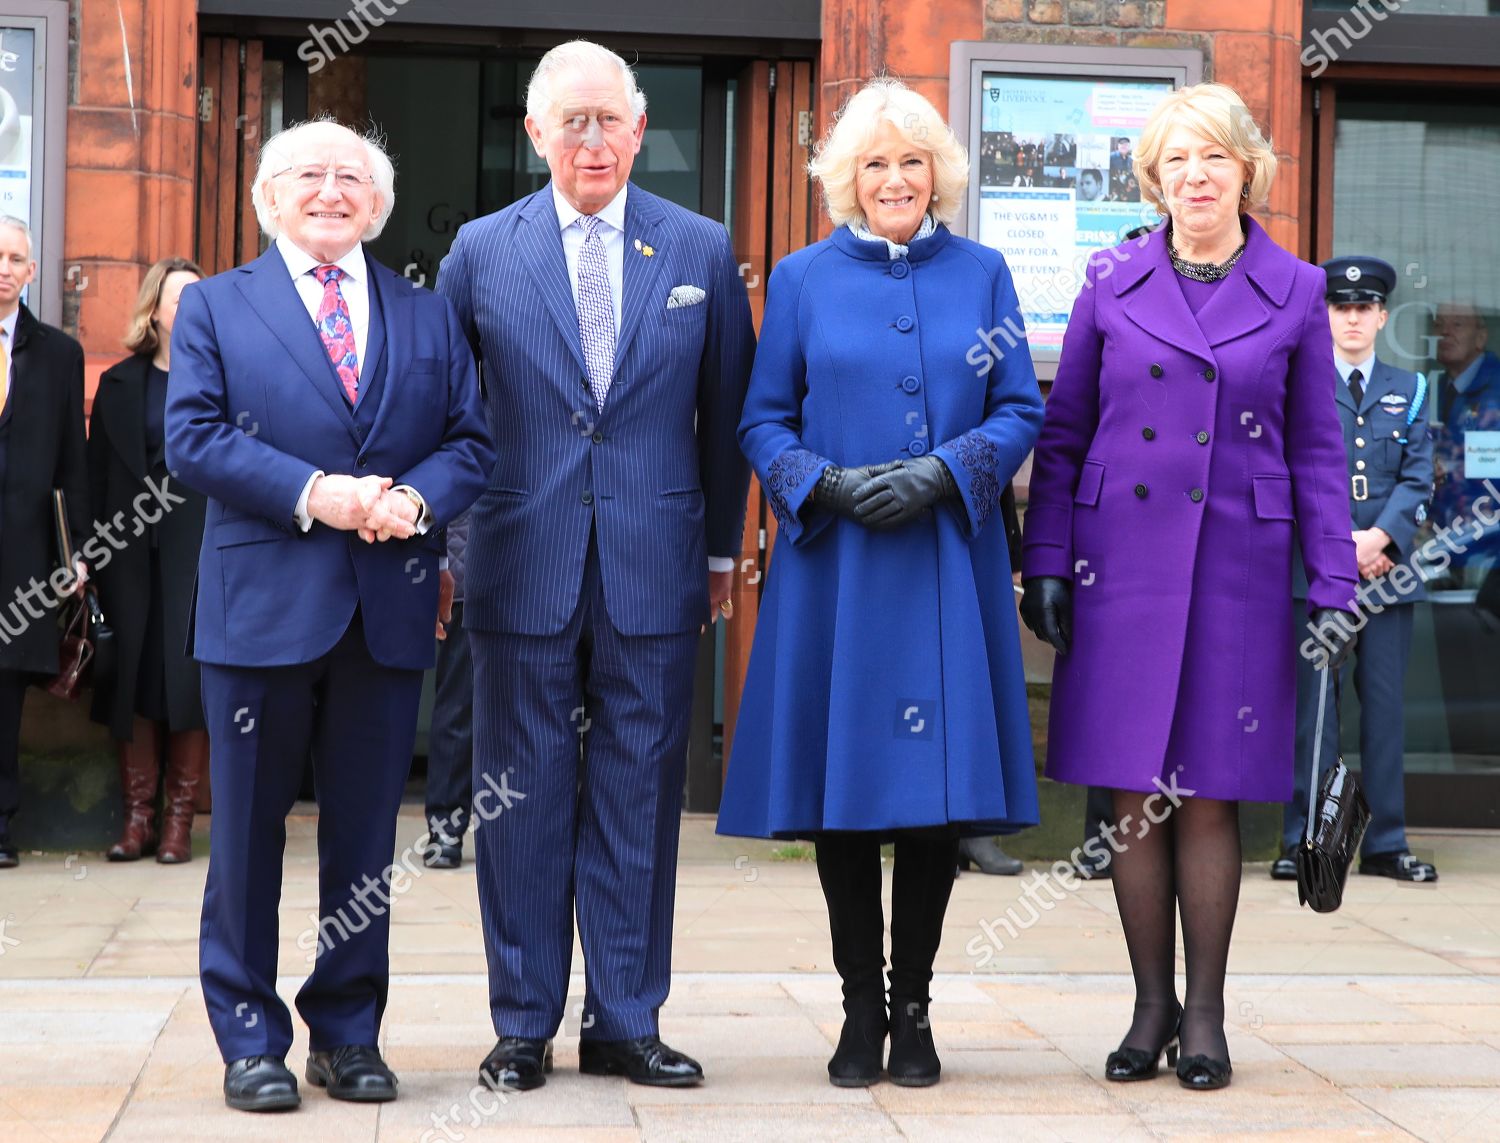 prince-charles-and-duchess-of-cornwall-visit-liverpool-uk-shutterstock-editorial-10102607a.jpg